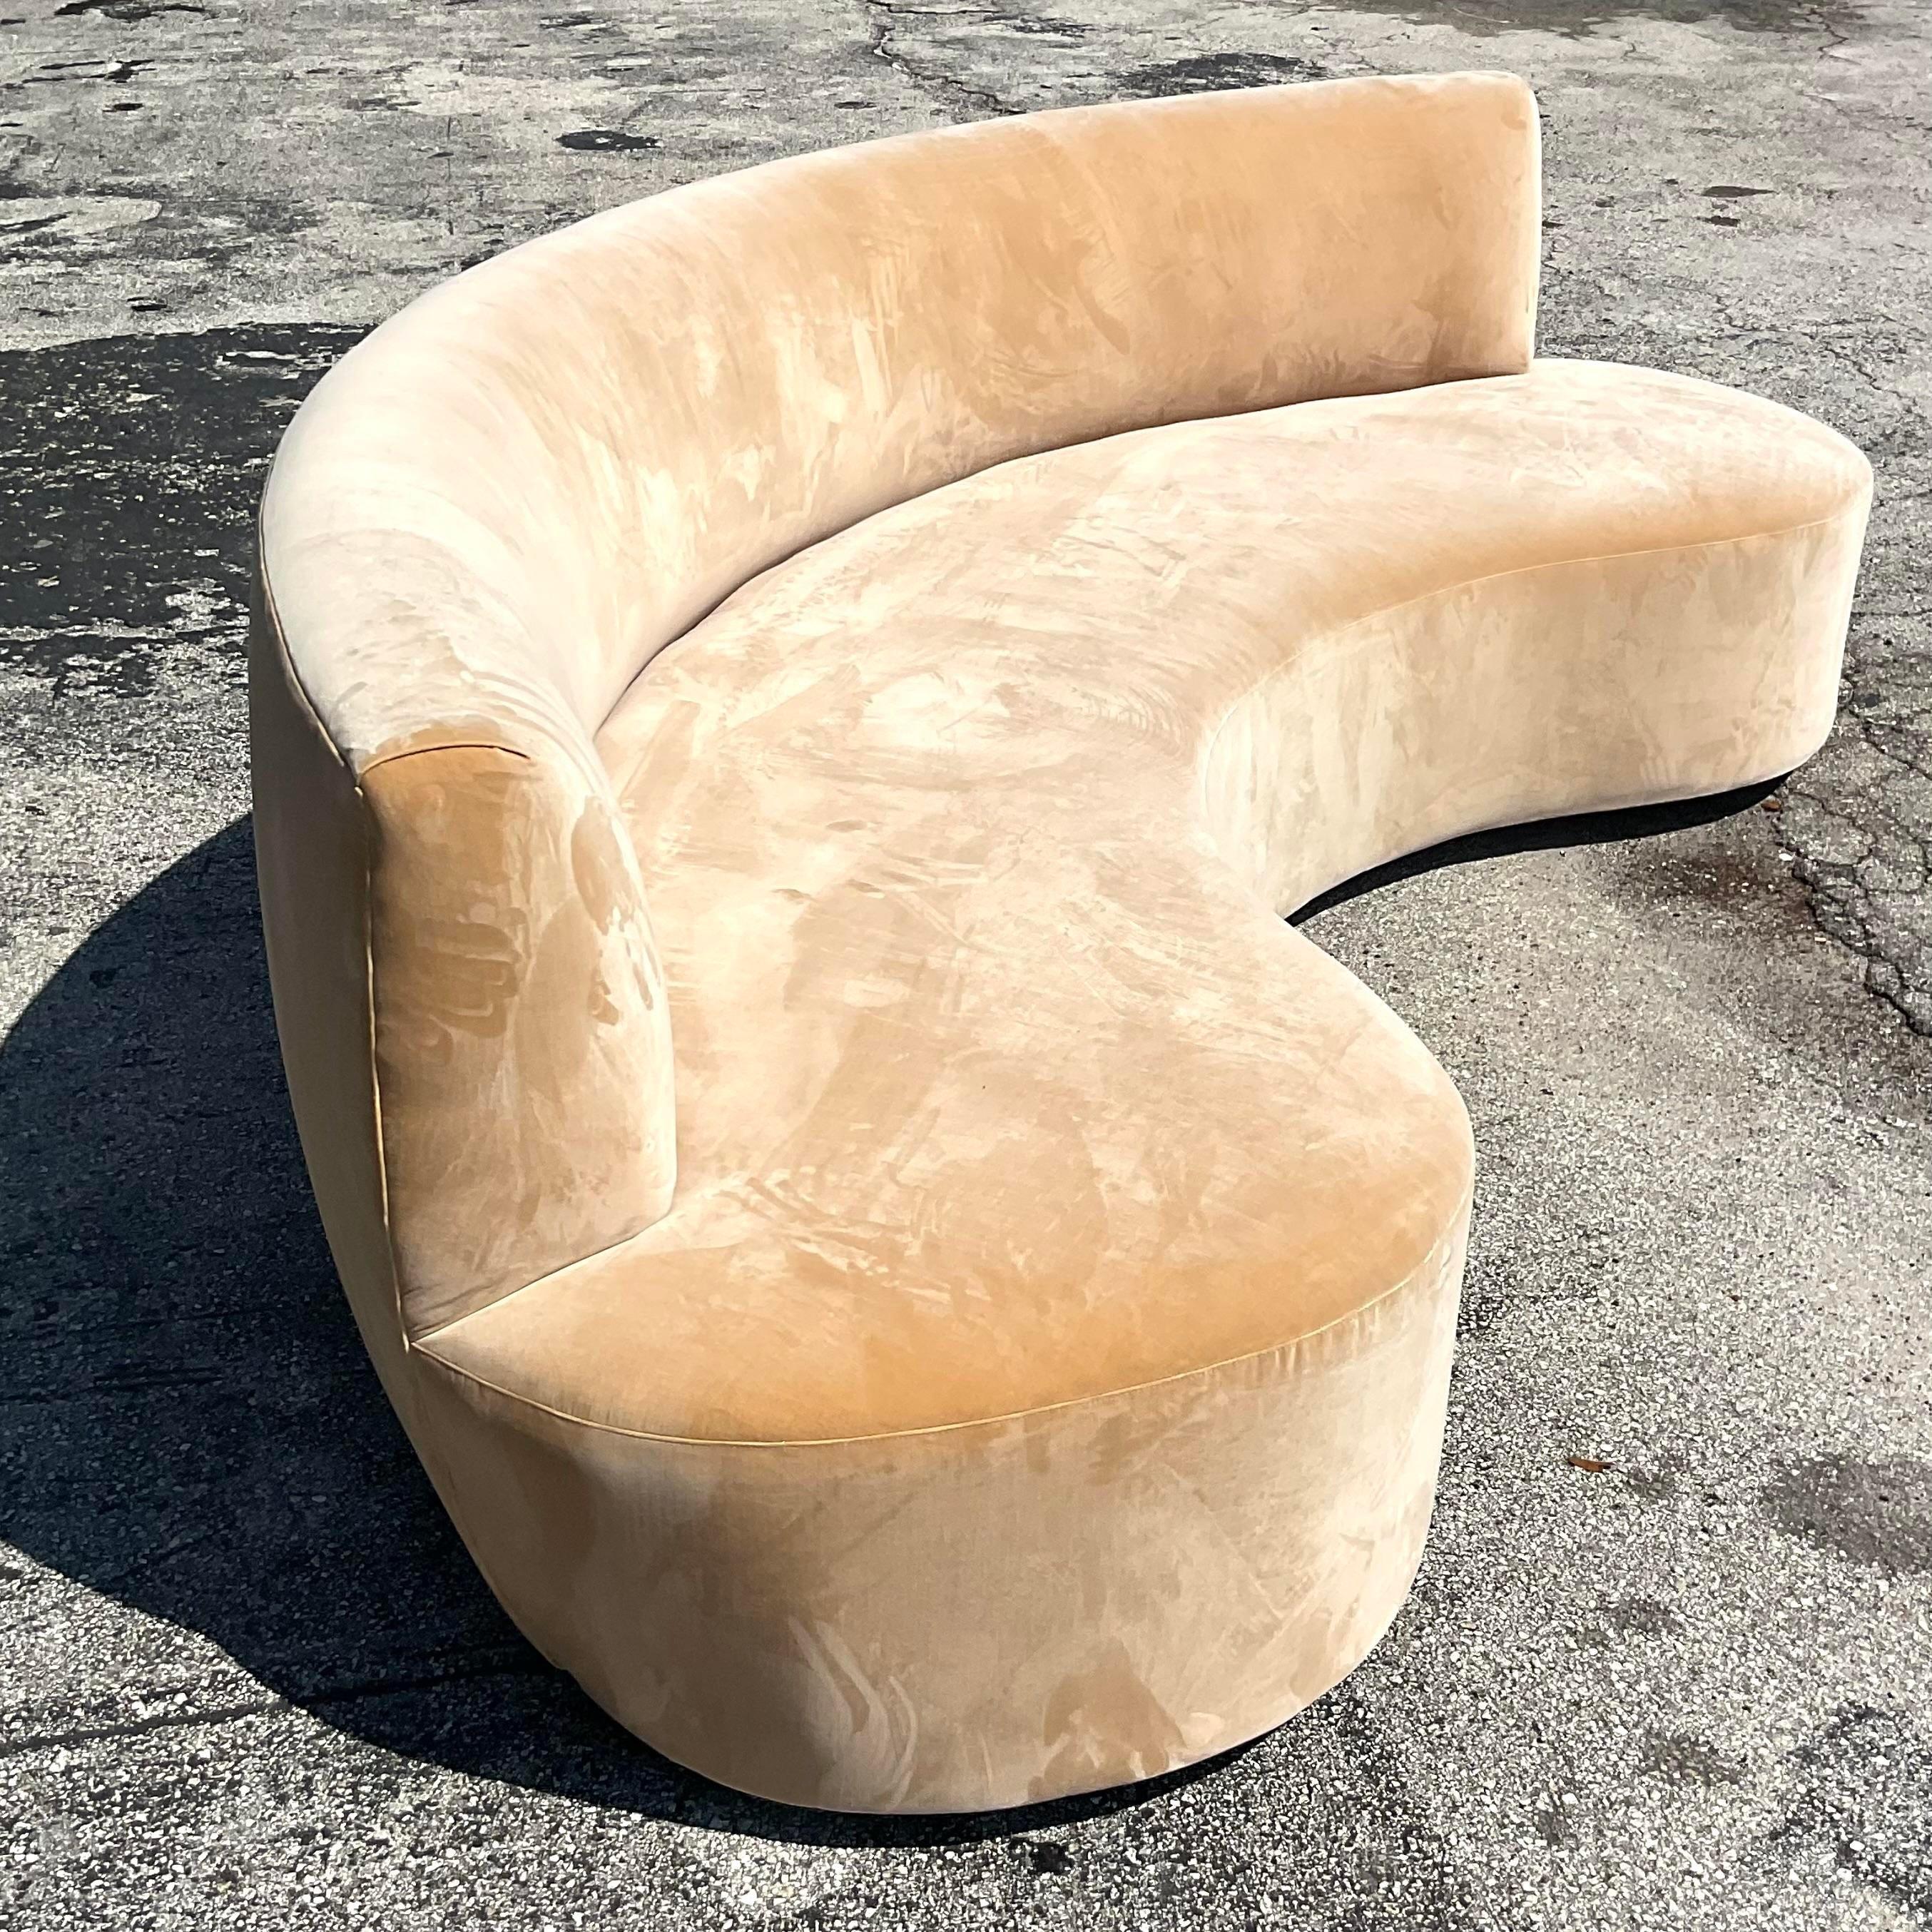 A sensational vintage Boho sofa. A chic biomorphic shape in a pale apricot velvet. Custom built and in great shape. Acquired from a Palm Beach estate.